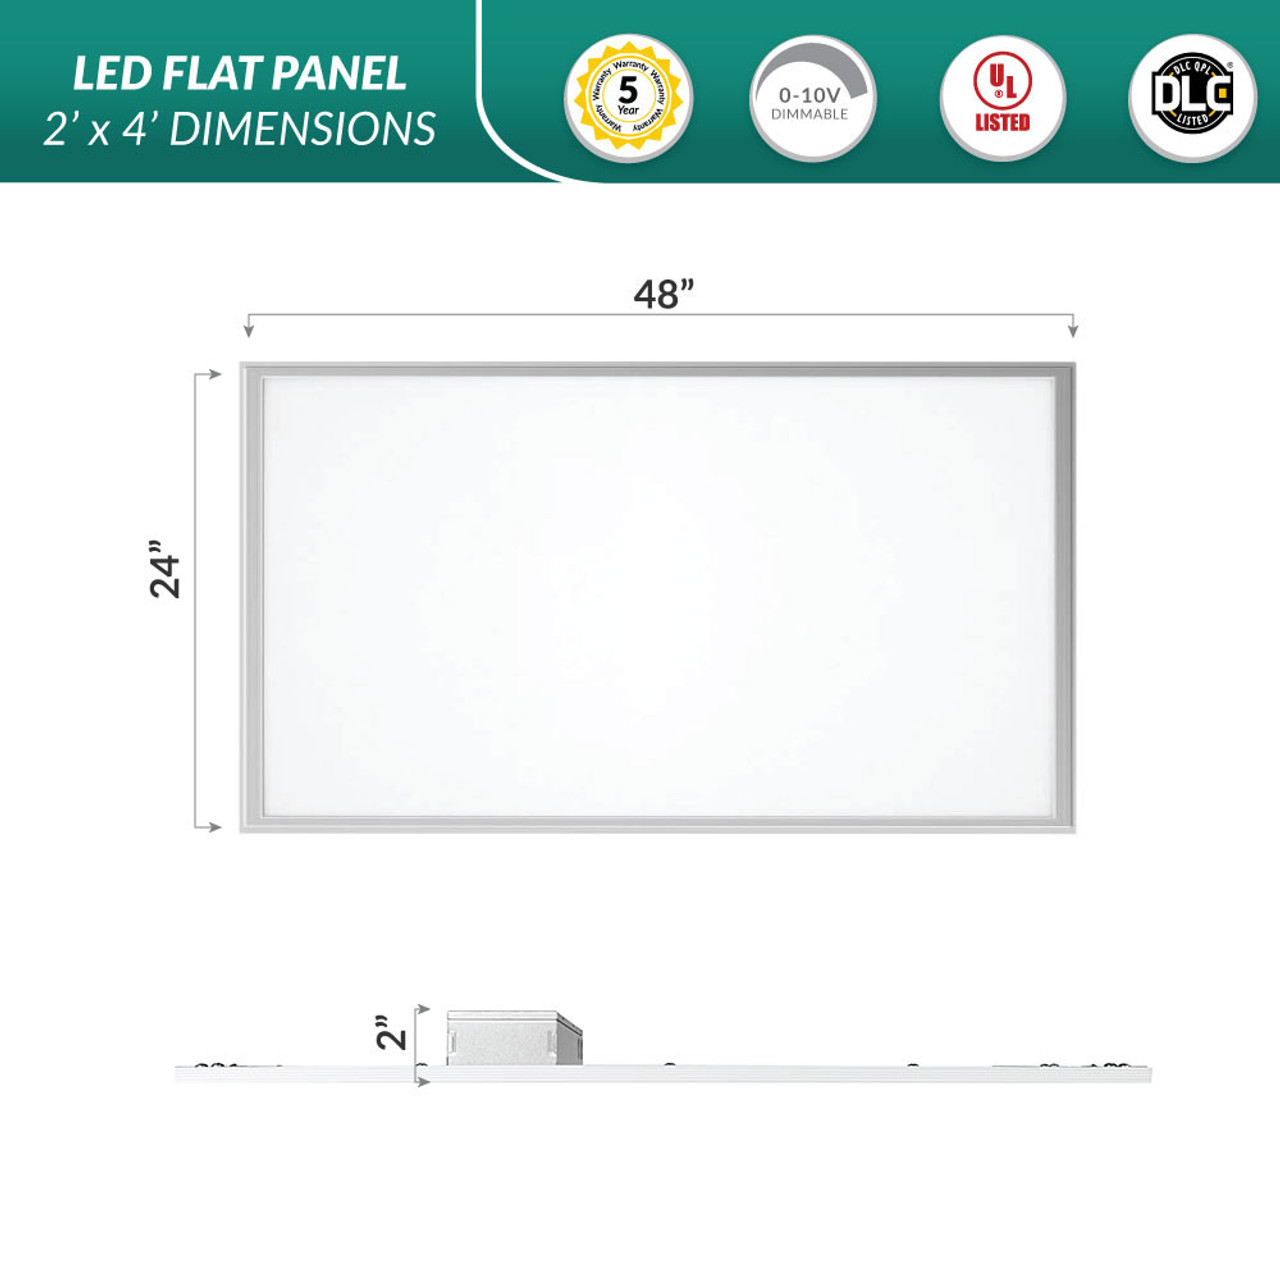 Papua Ny Guinea Malawi Problem LED Drop Ceiling Panel 2X4 - 3500K - Drop Ceiling Light - Neutral White -  Dimmable